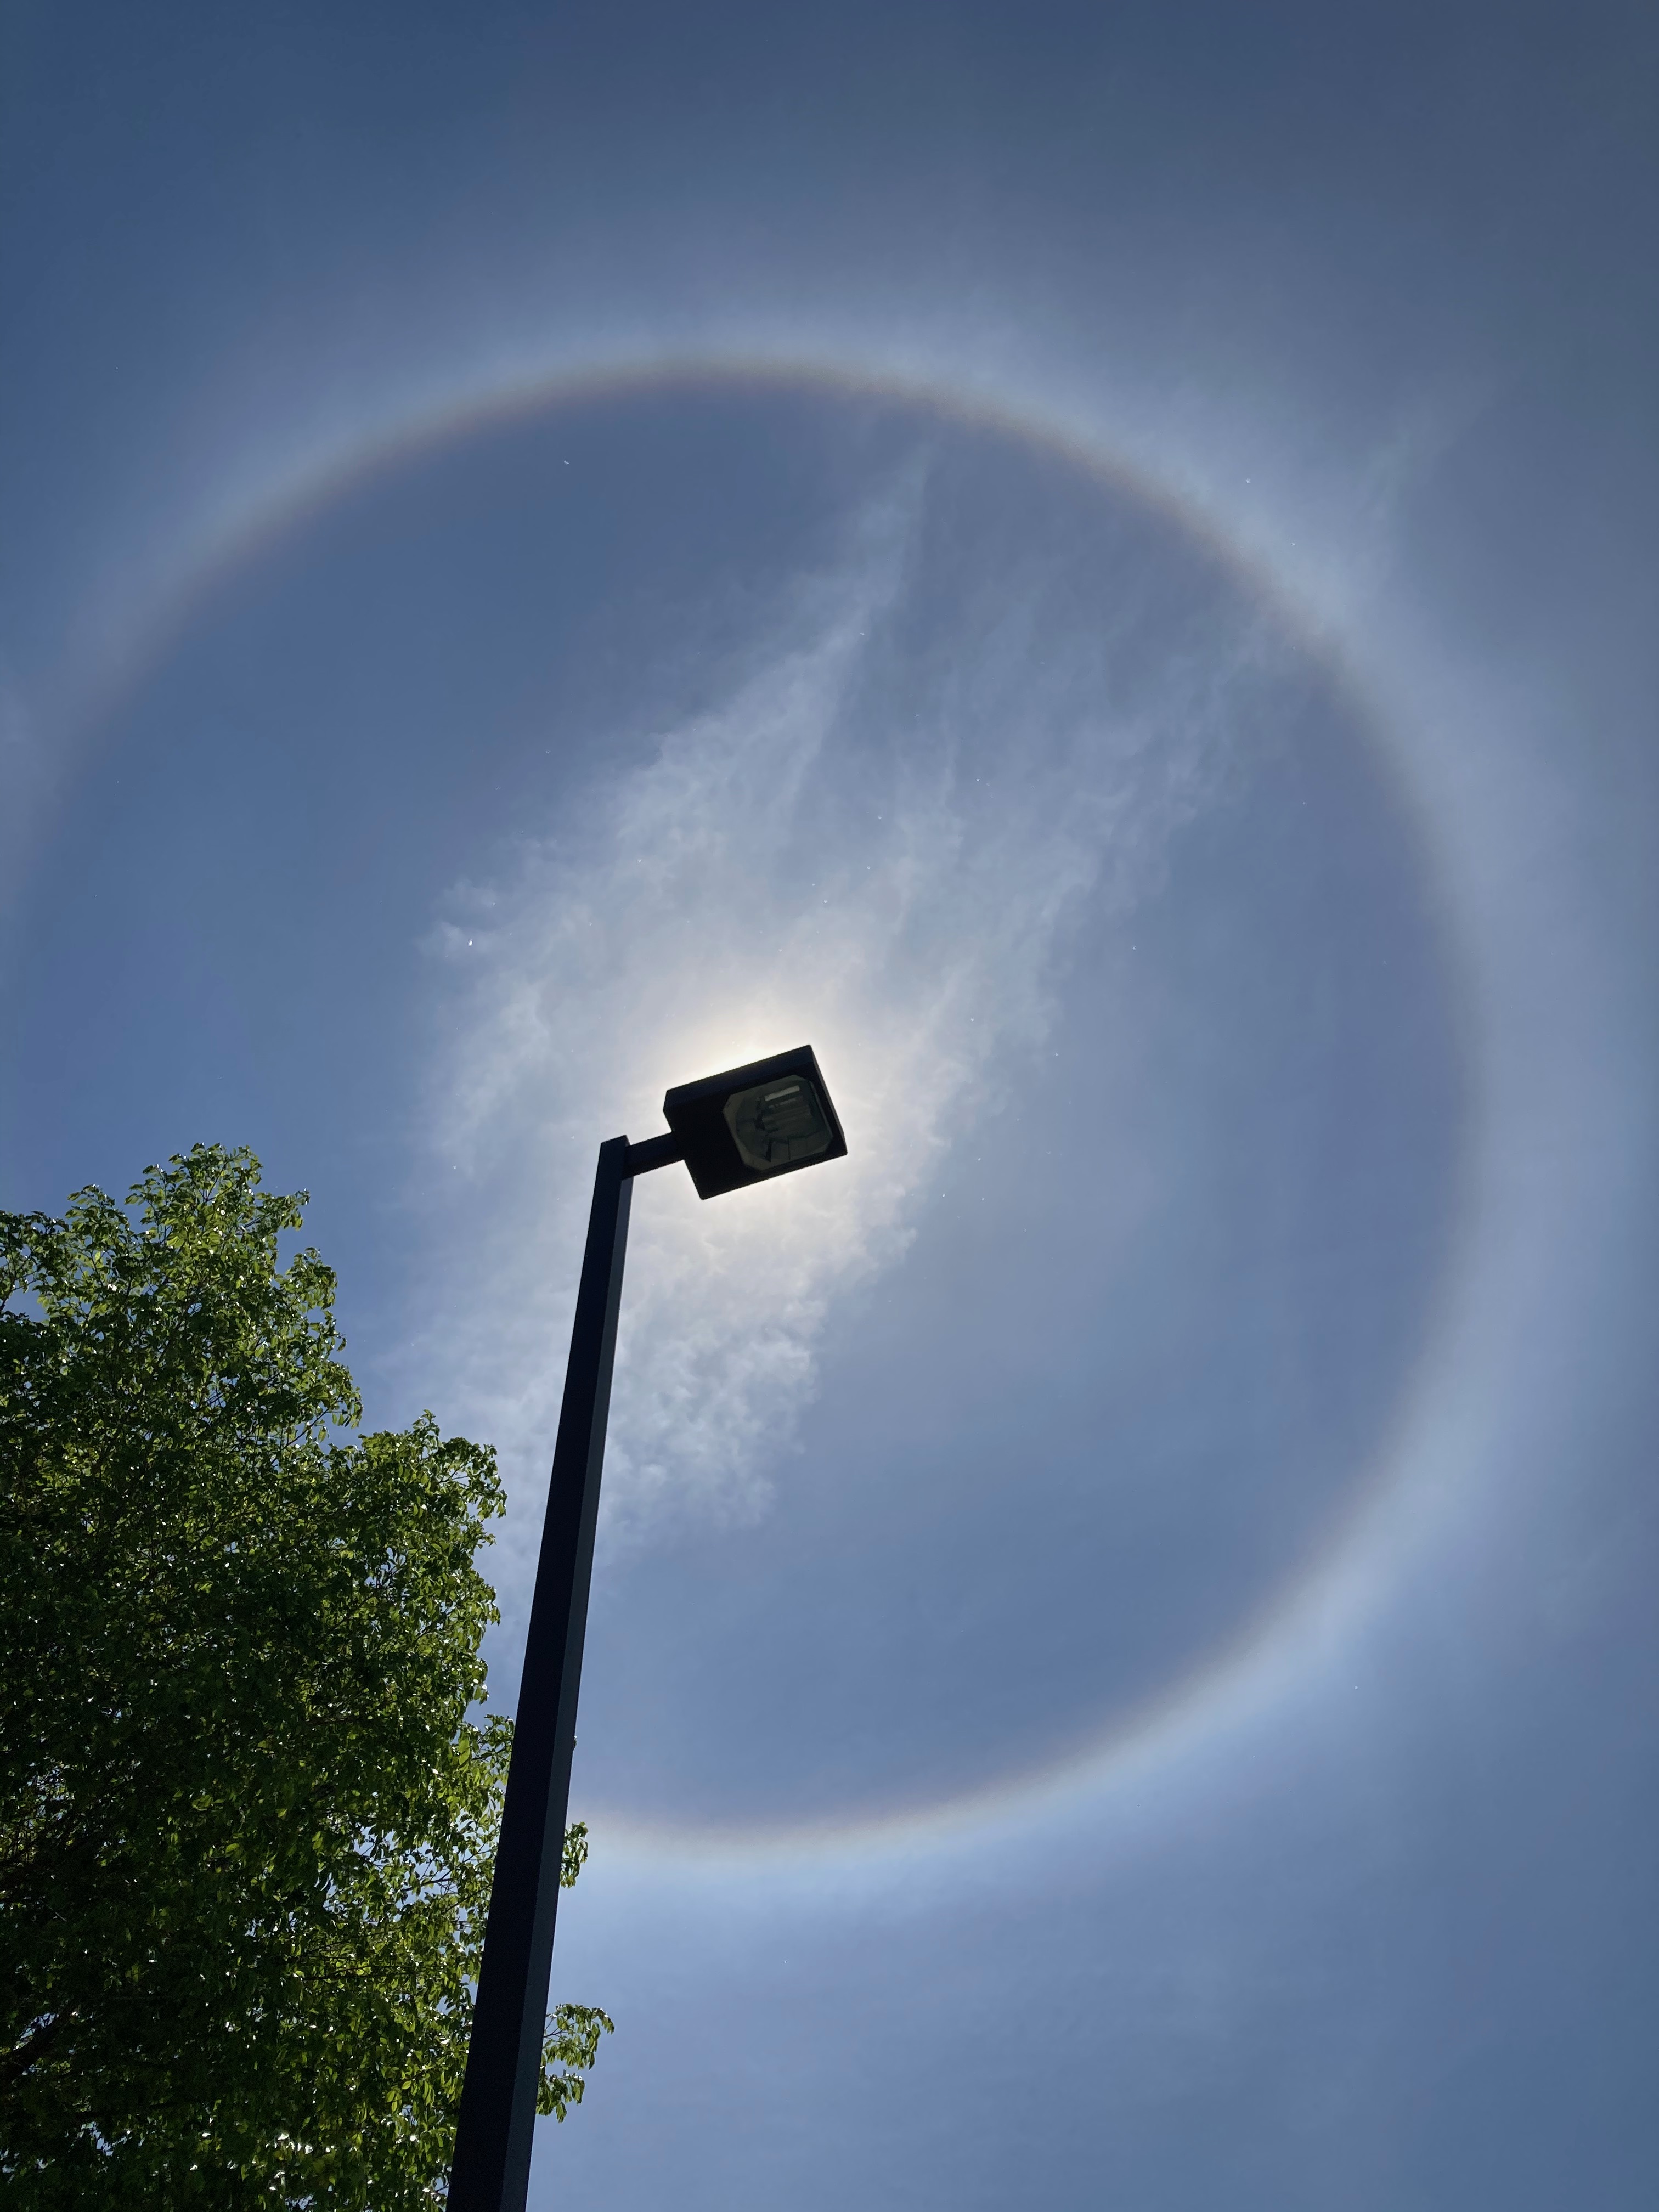 This halo effect only occurs when a ice cloud aligns with the sun perfectly. This is one definitive way to tell if a cloud is made of ice crystals but it's a rare phenomenon (image credits: Erica Venkatesulu).